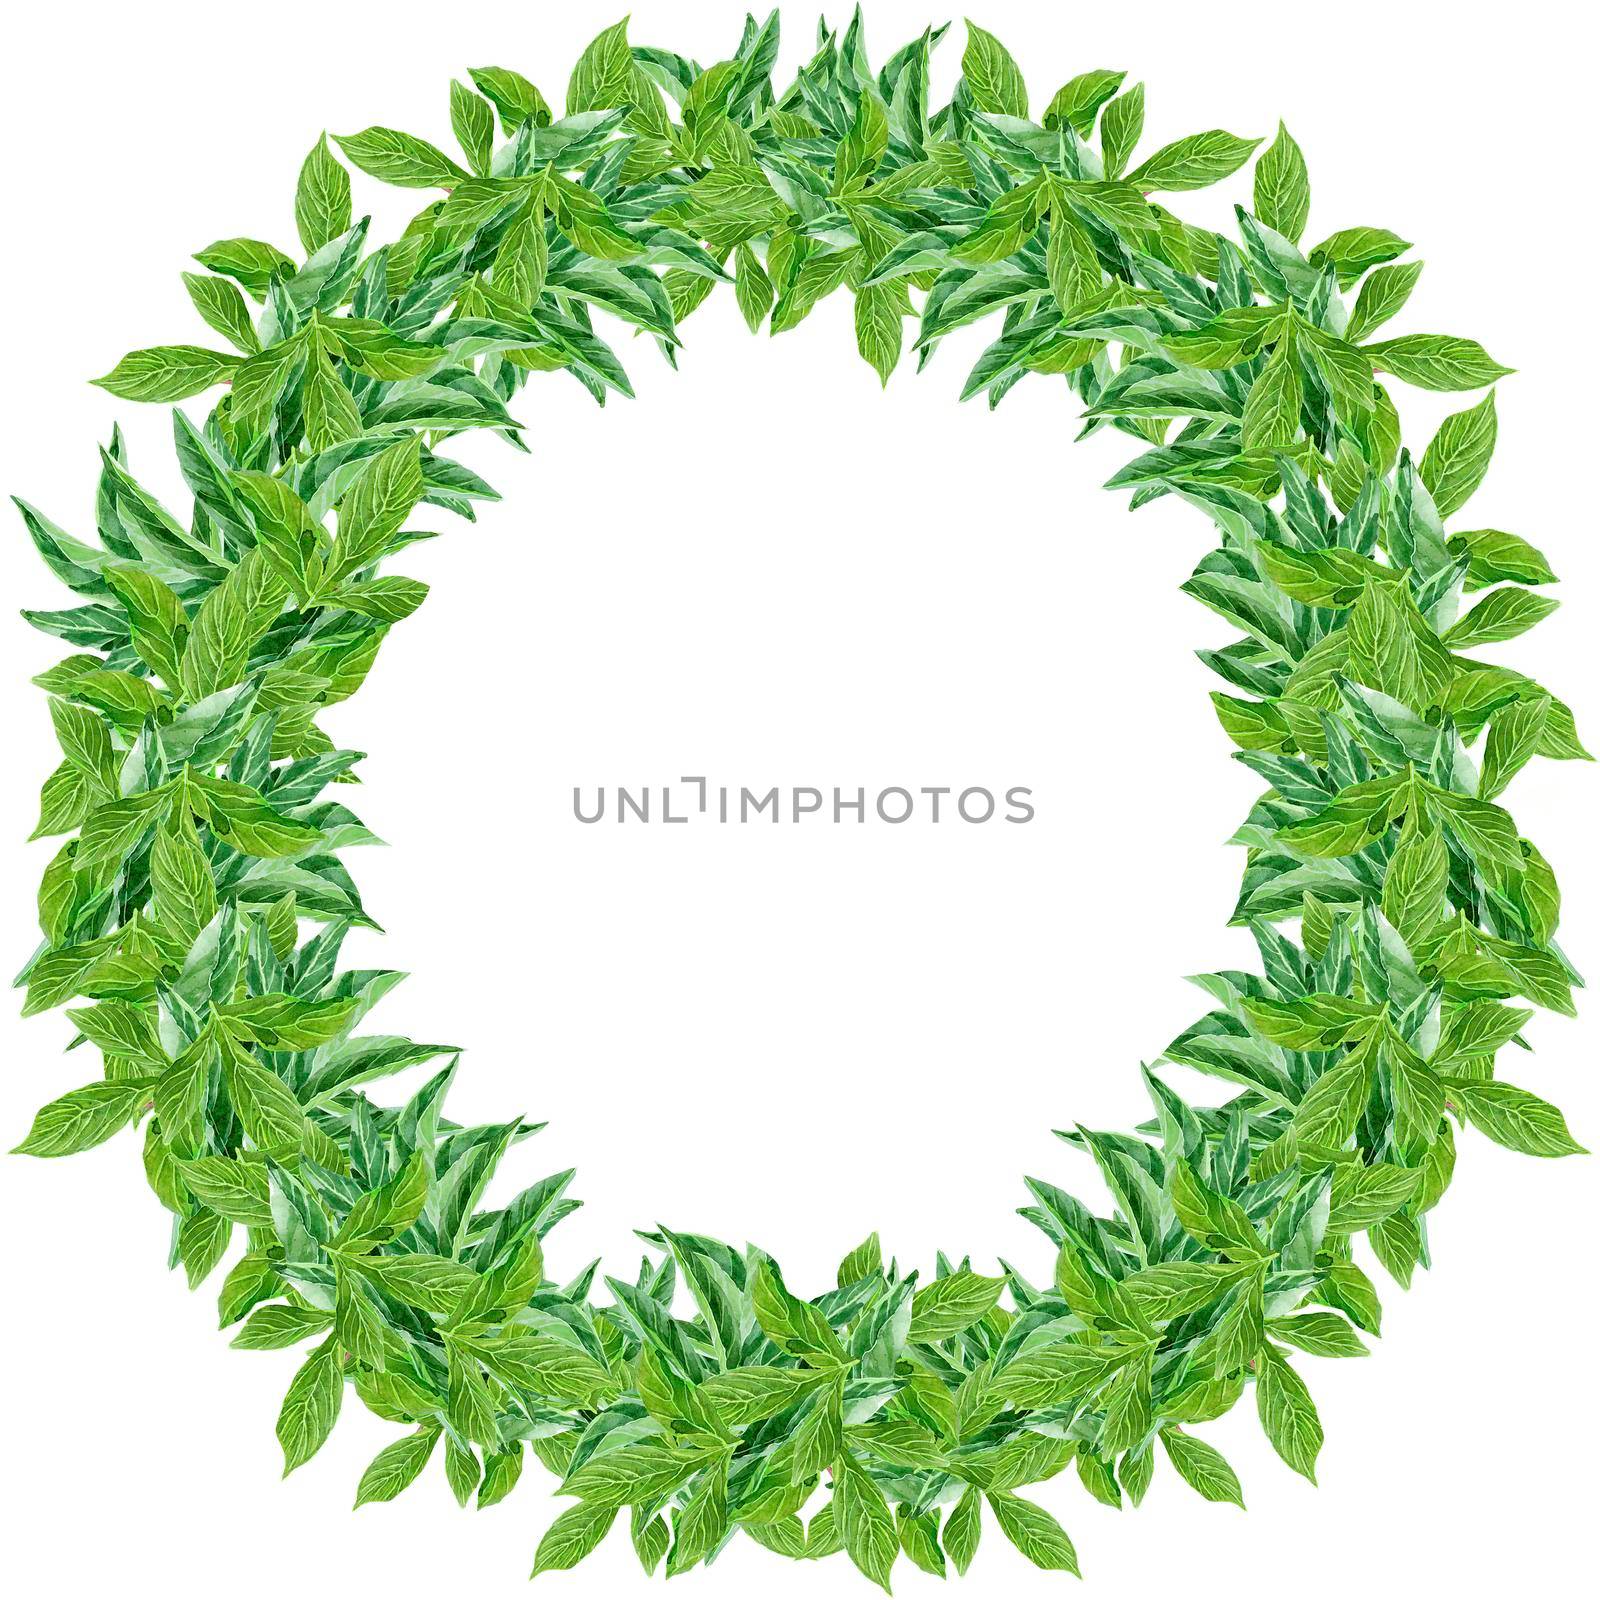 Lush luxury wreath of greenery with small leaves by NataOmsk